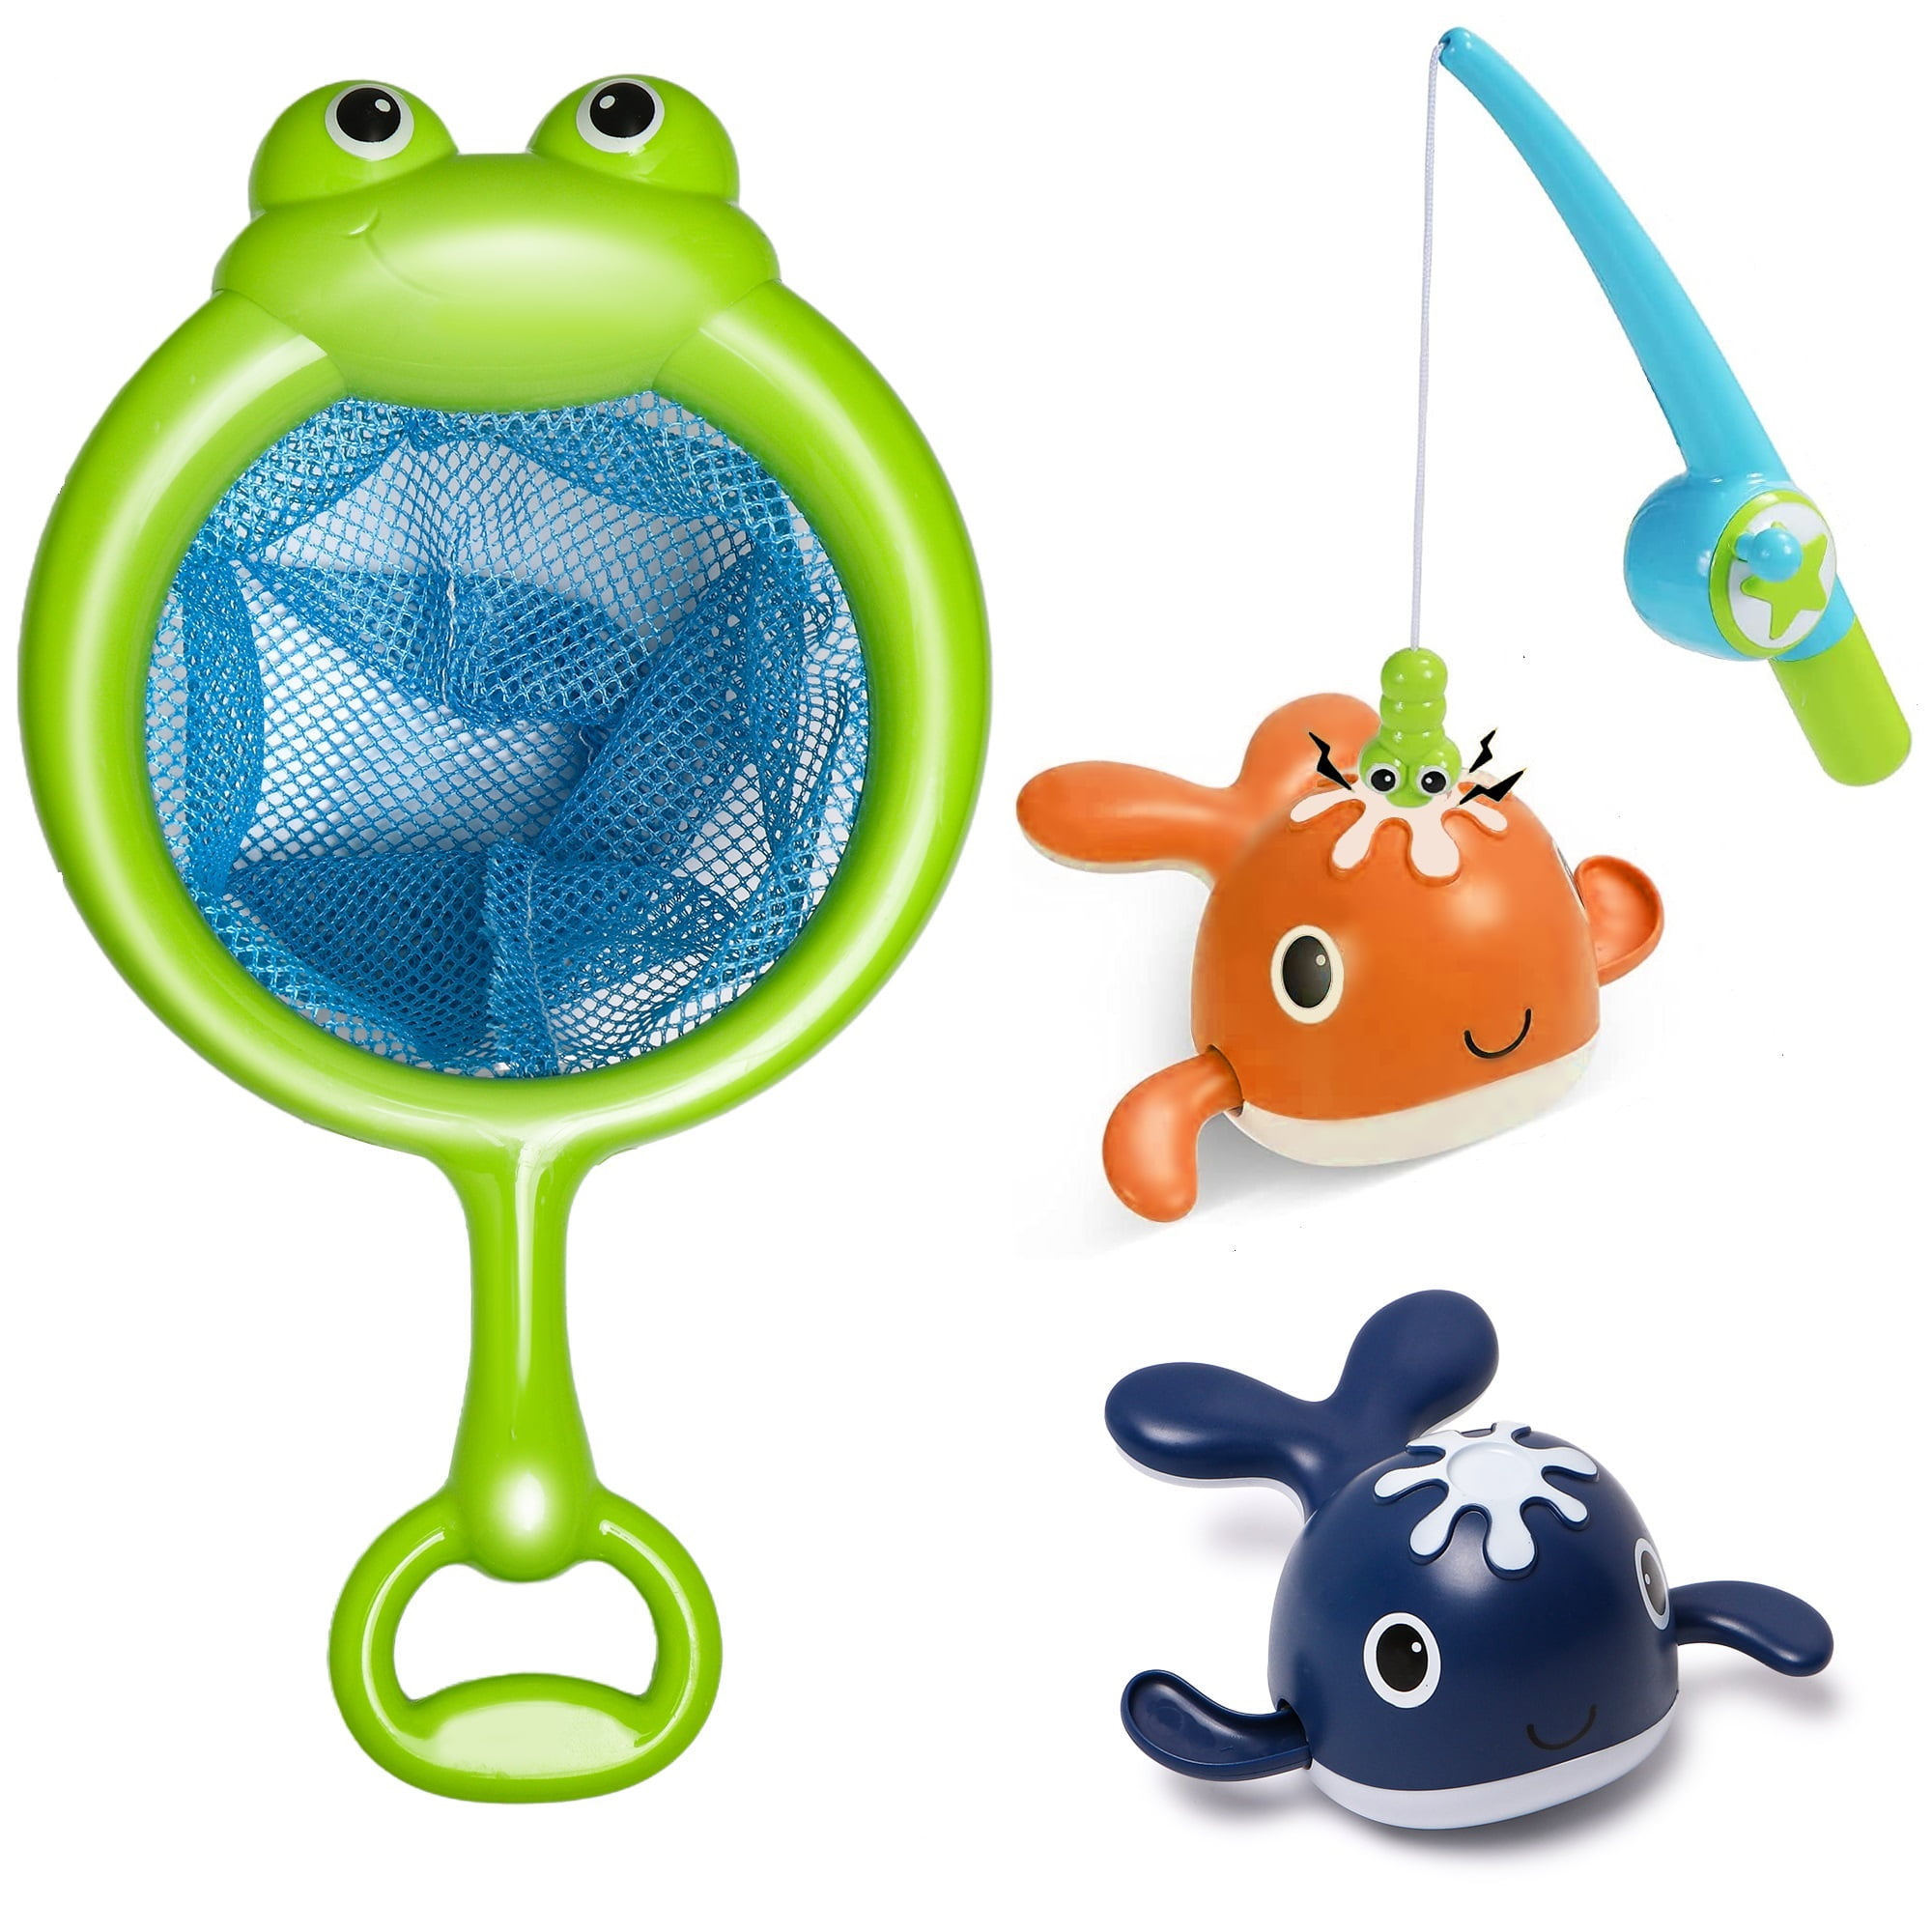 Beefunni Magnetic Baby and Toddler Bath Toy, Fishing Games